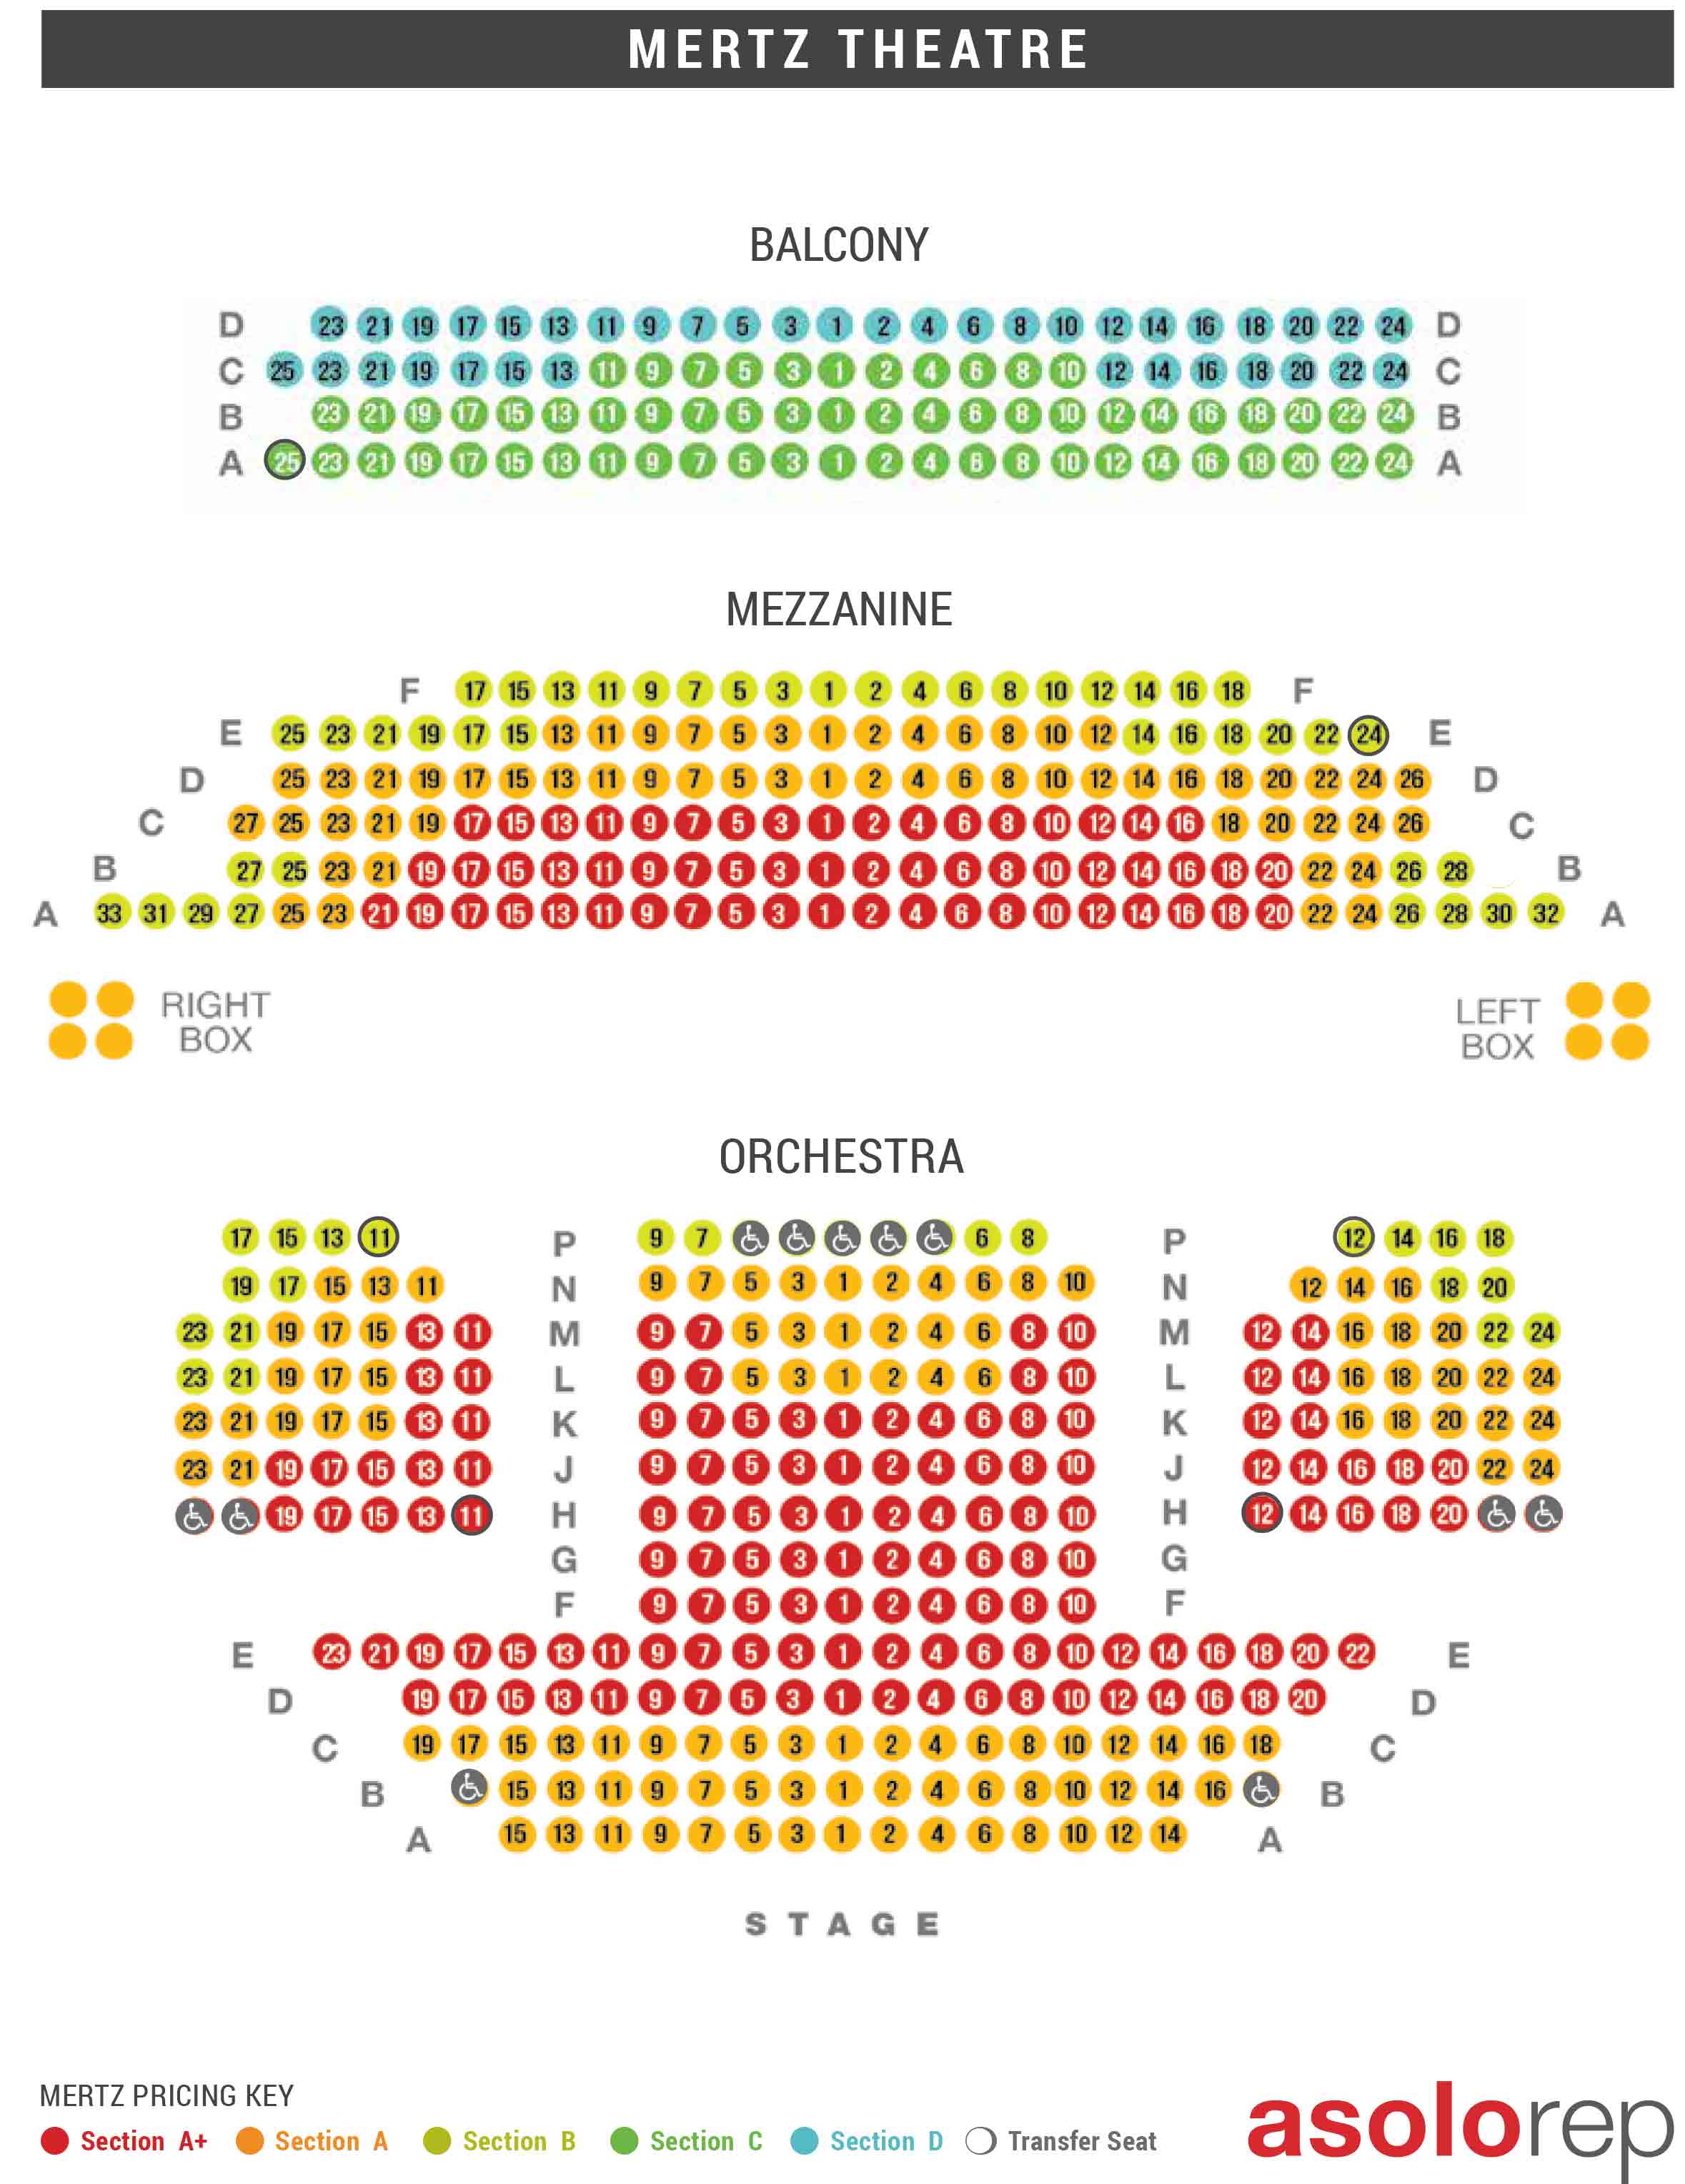 Artist Repertory Theater Seating Chart